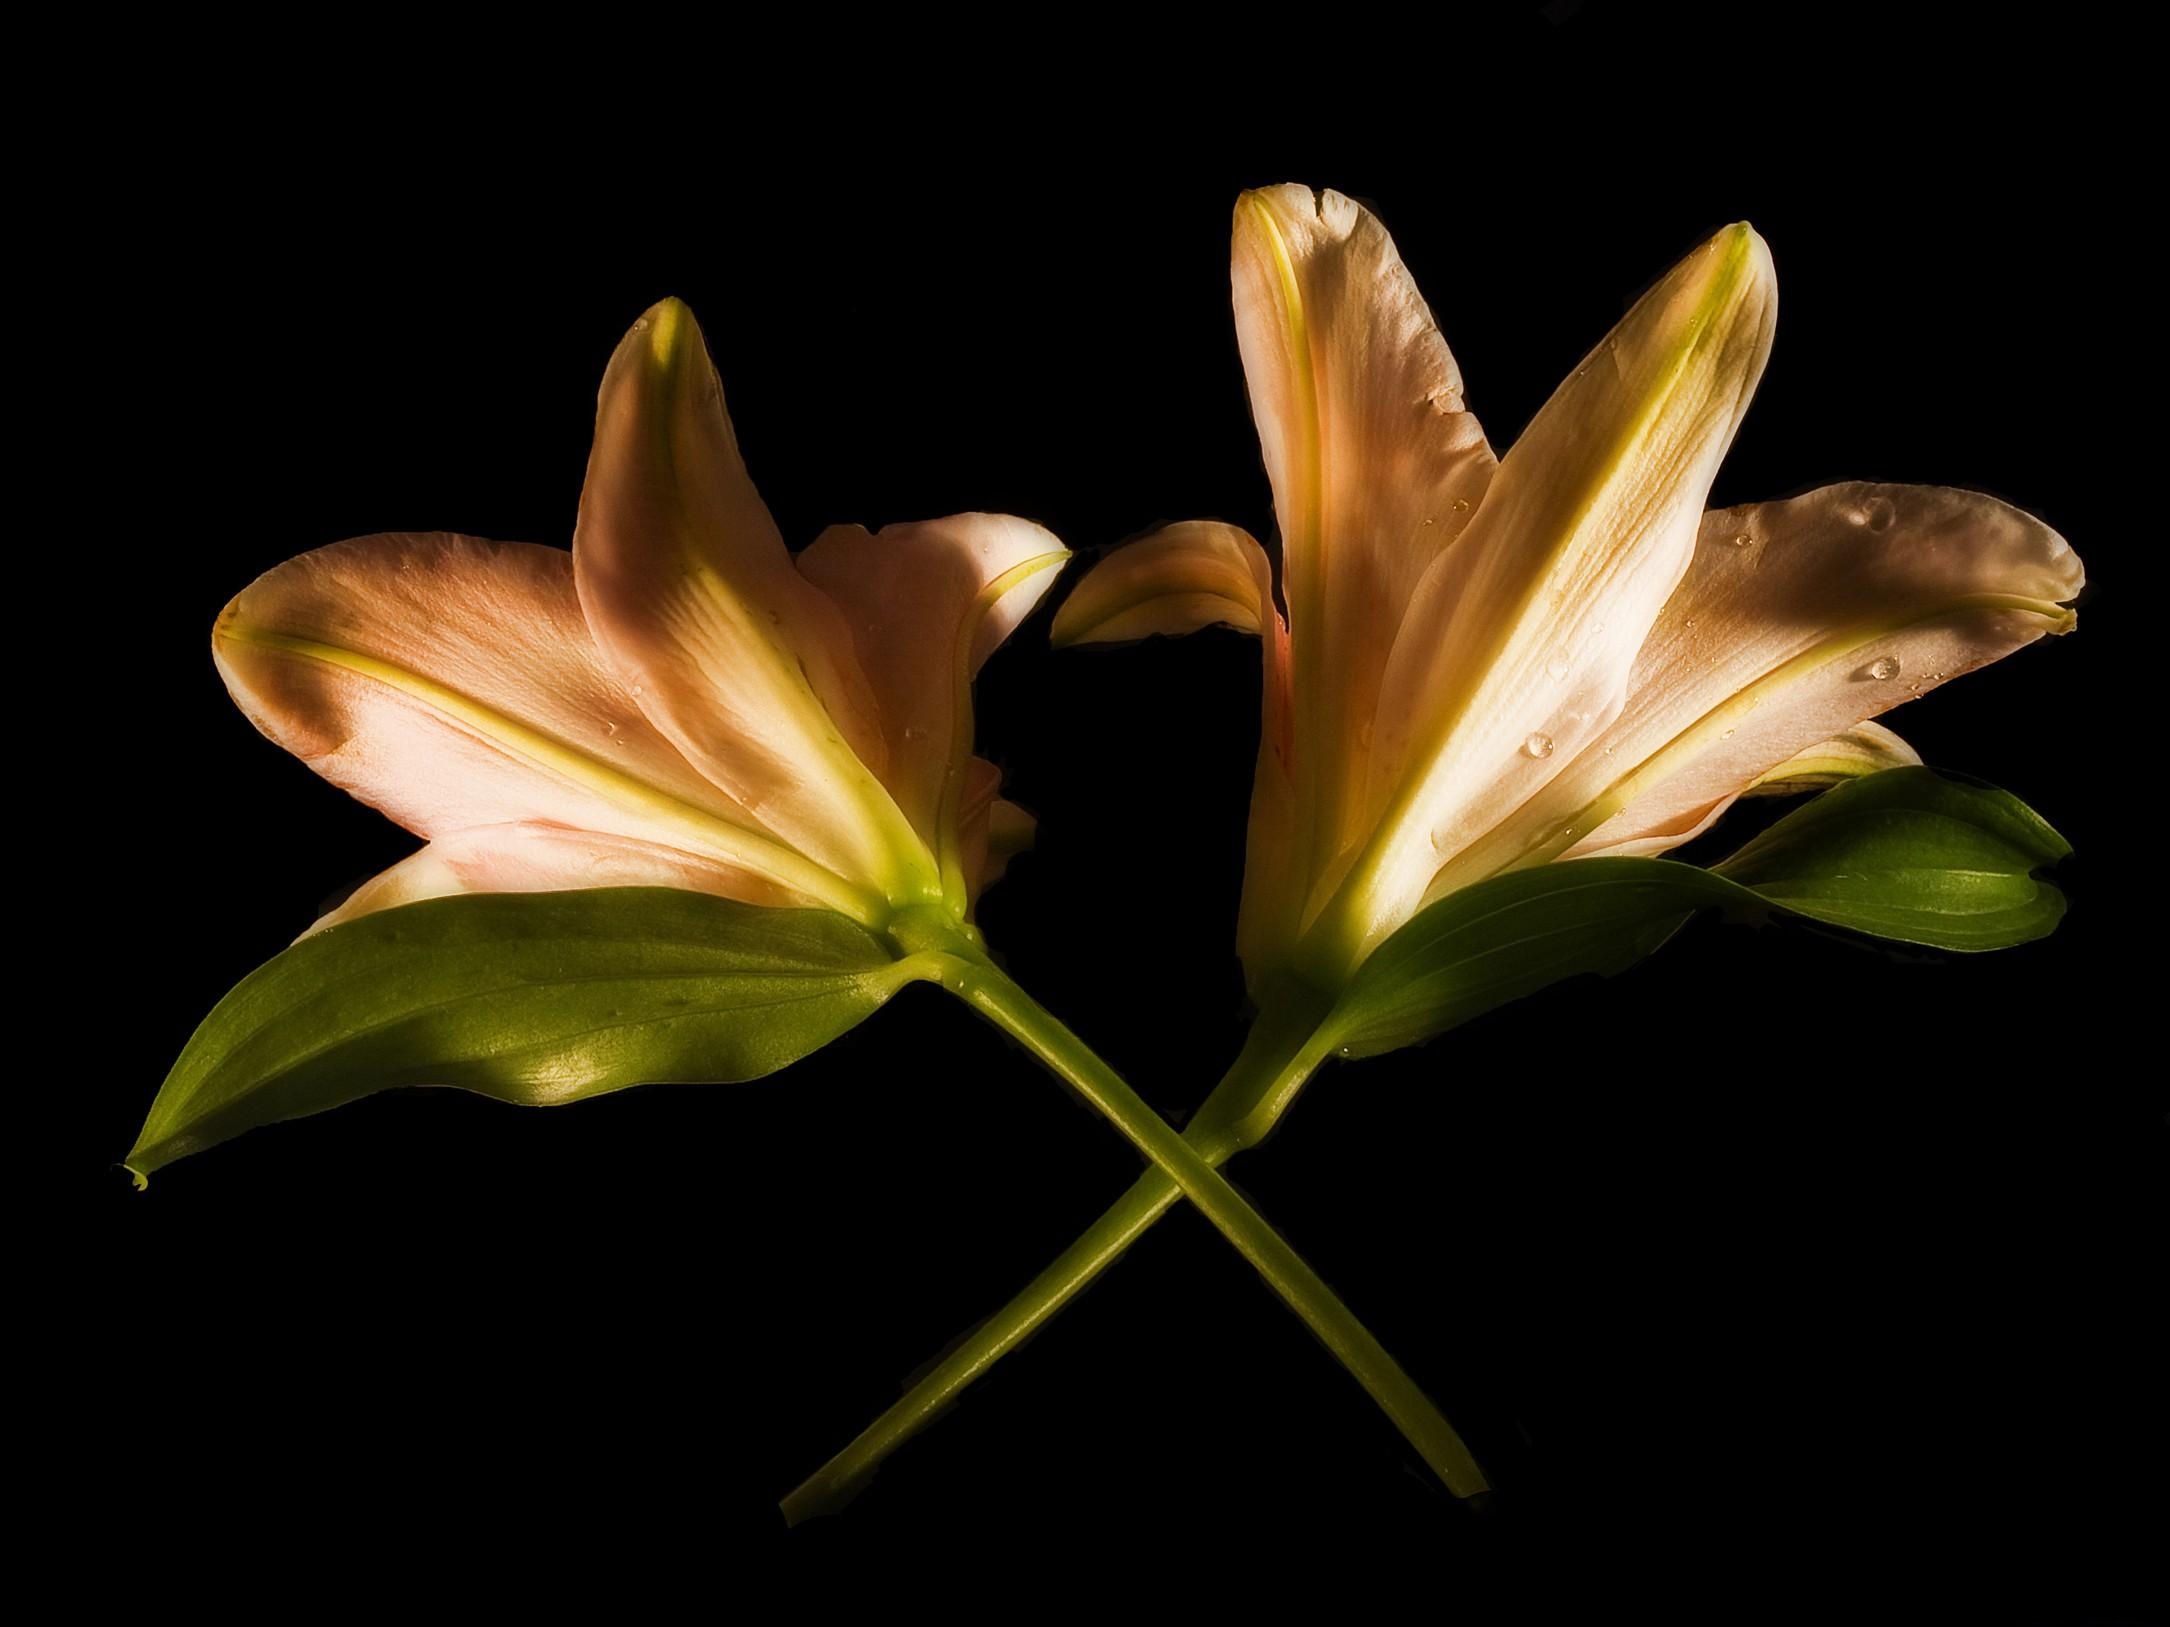 flowers, lilies, couple, pair, black background, crossing, intersection